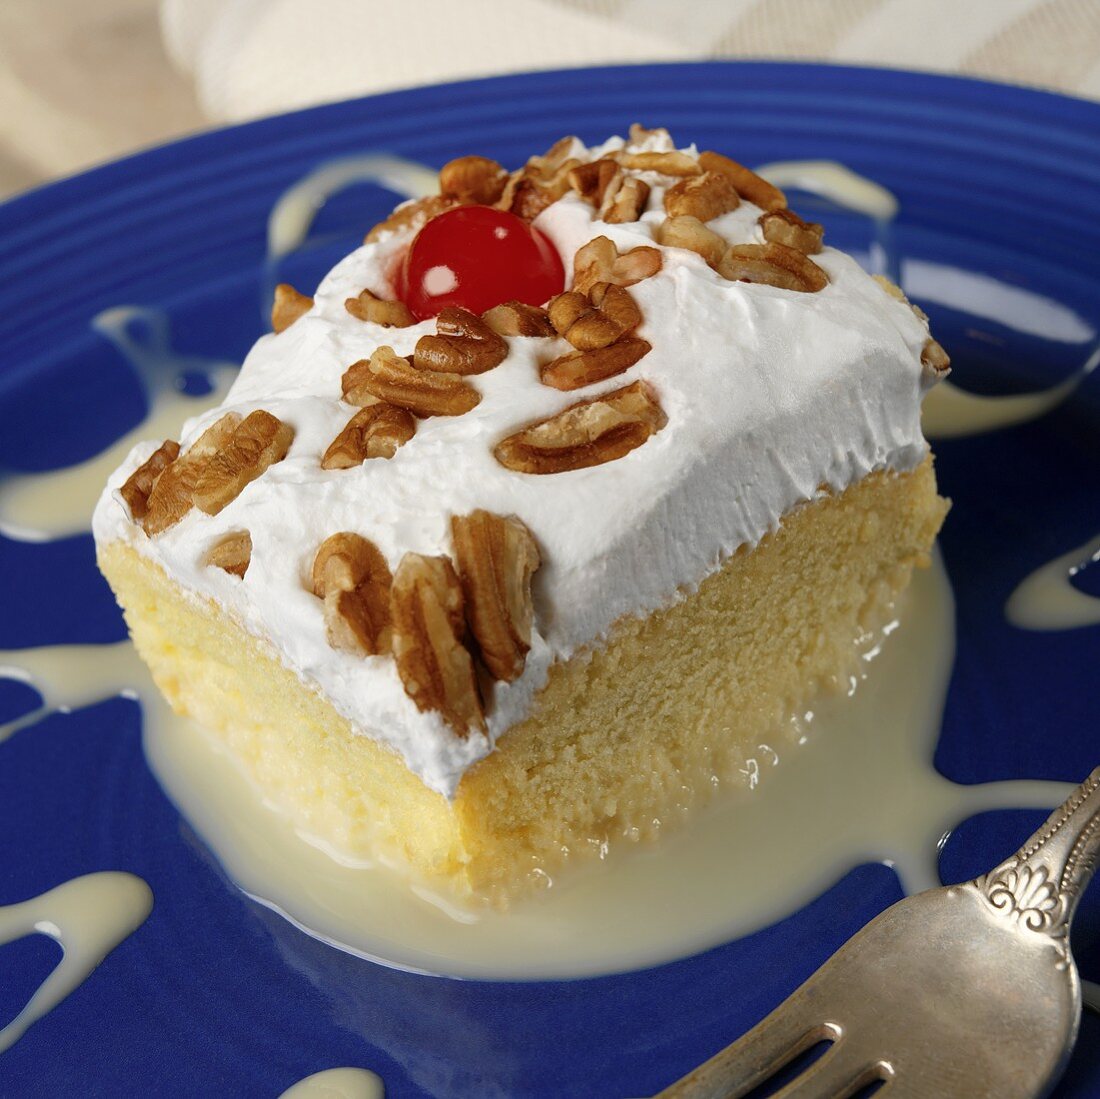 Piece of Tres Leches Cake